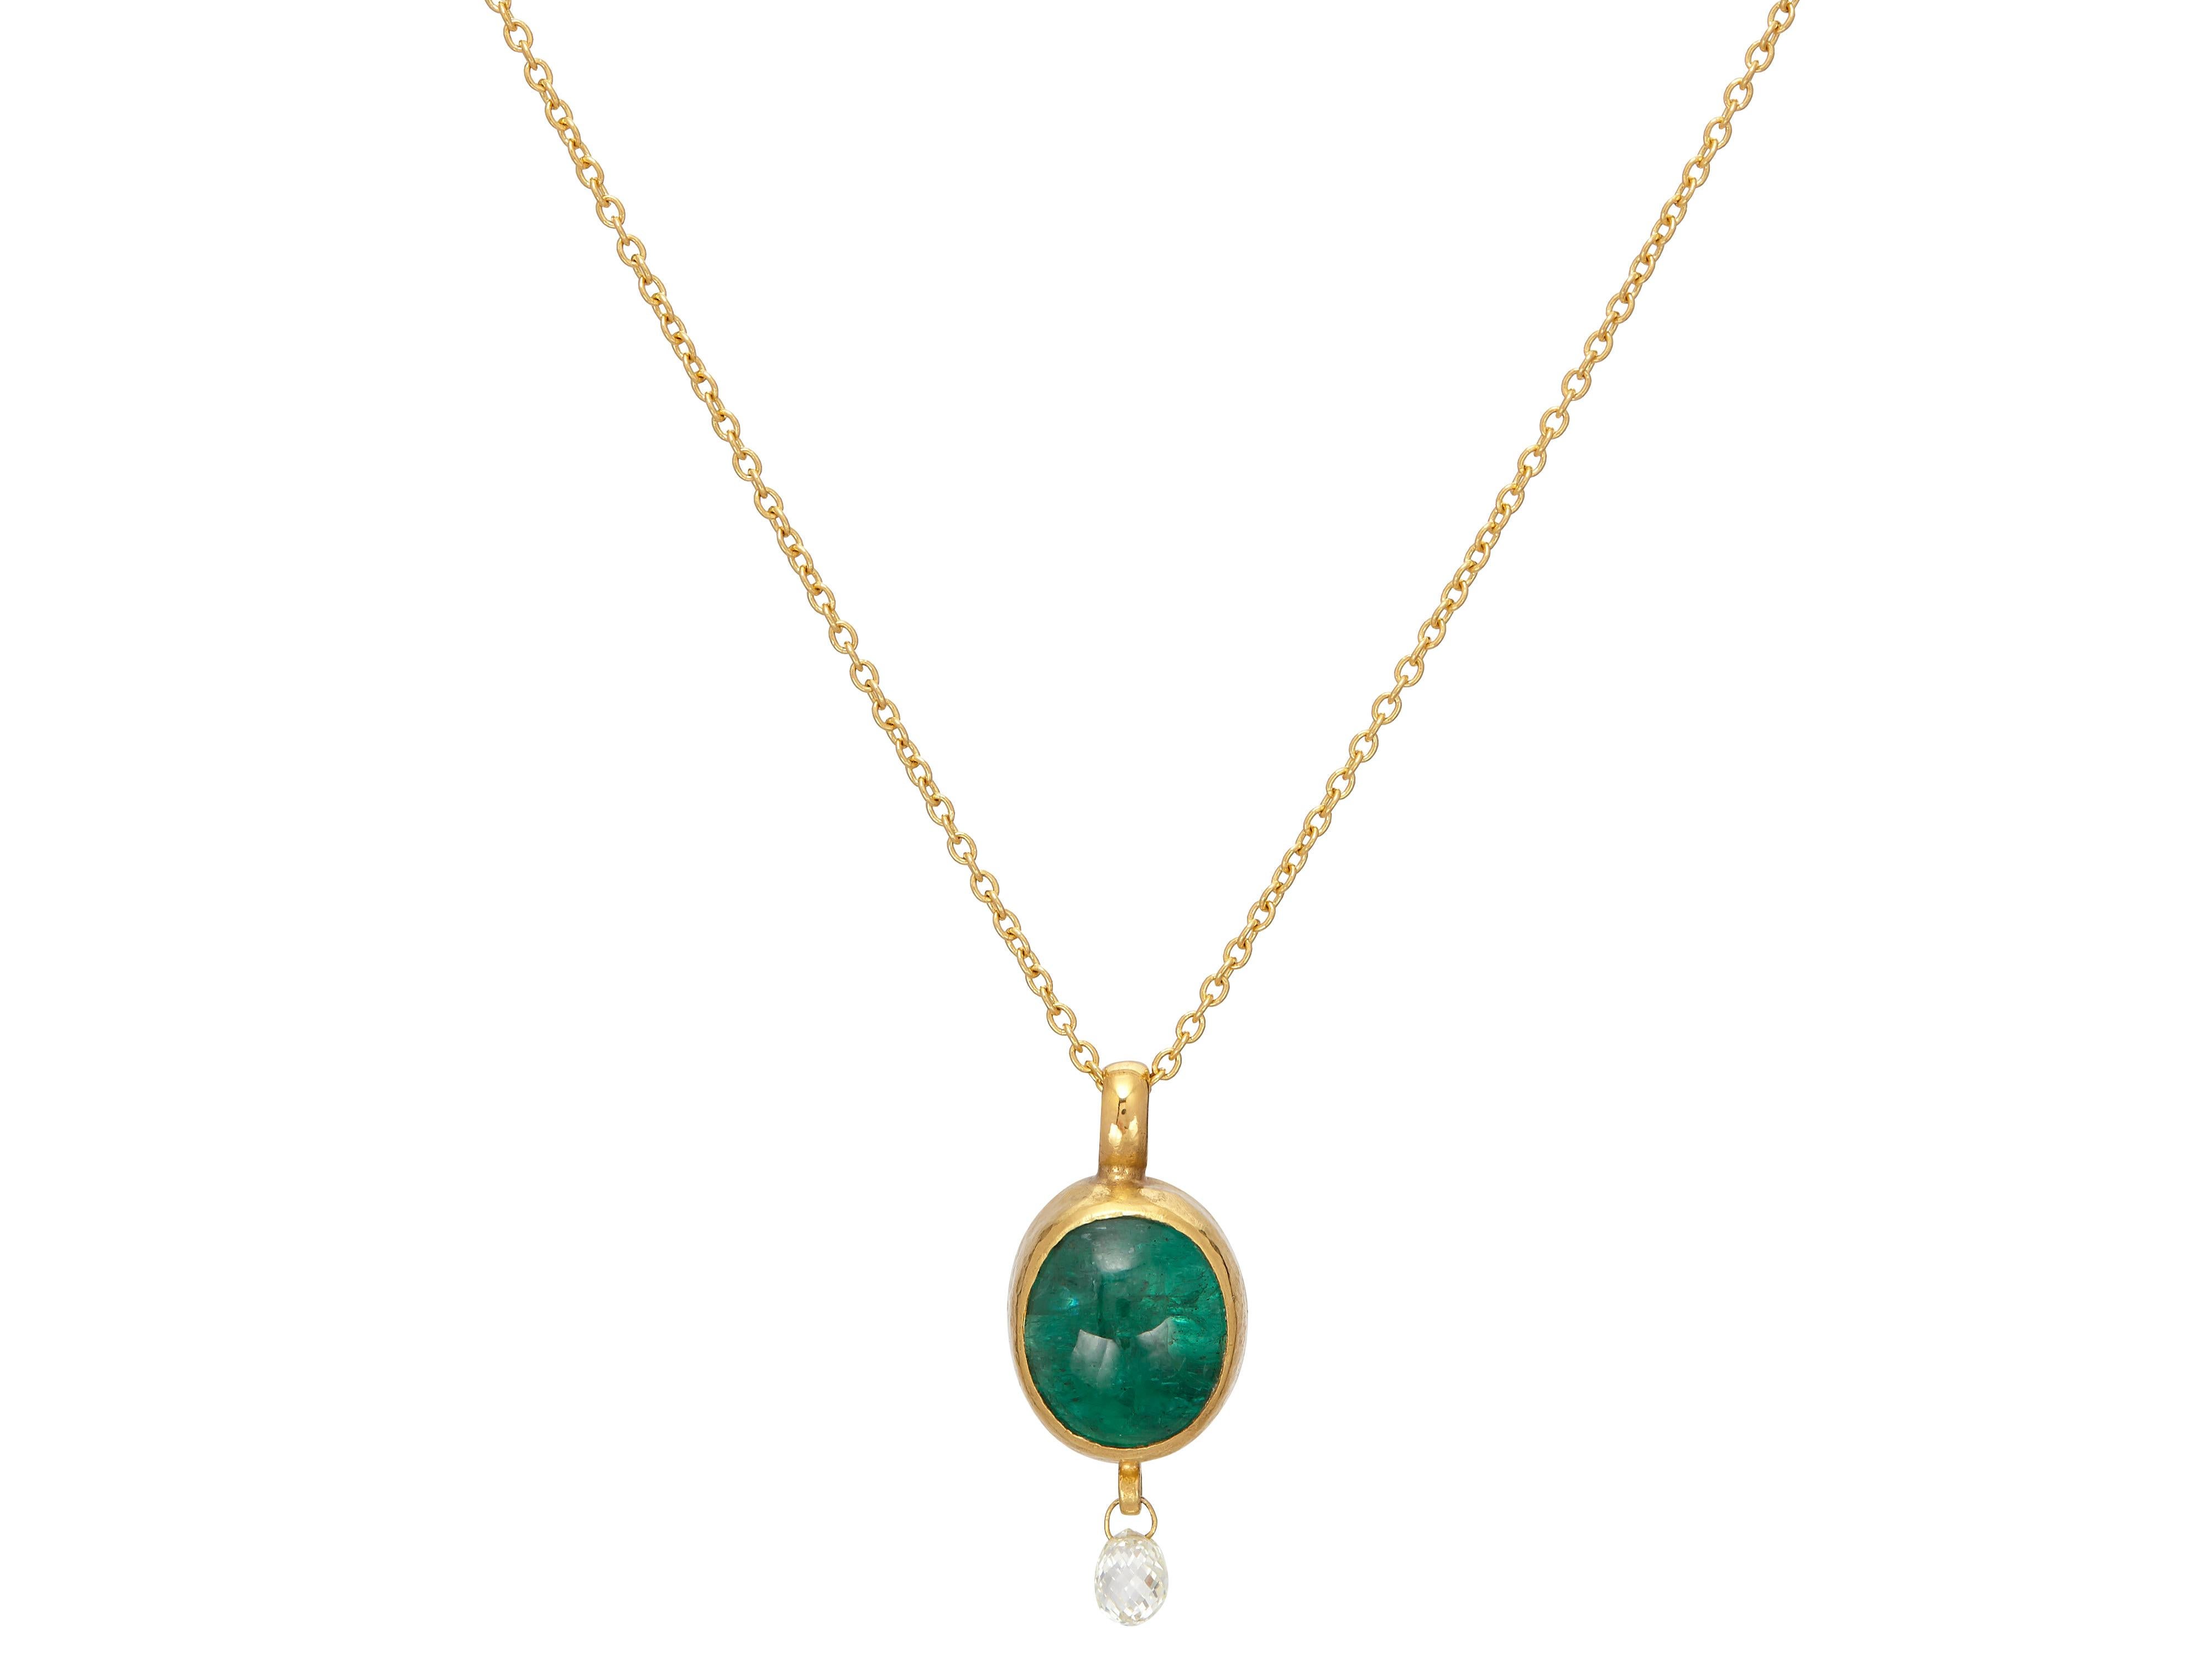 Women's One-of-a-Kind Rune Gold Pendant Necklace, with Emerald For Sale